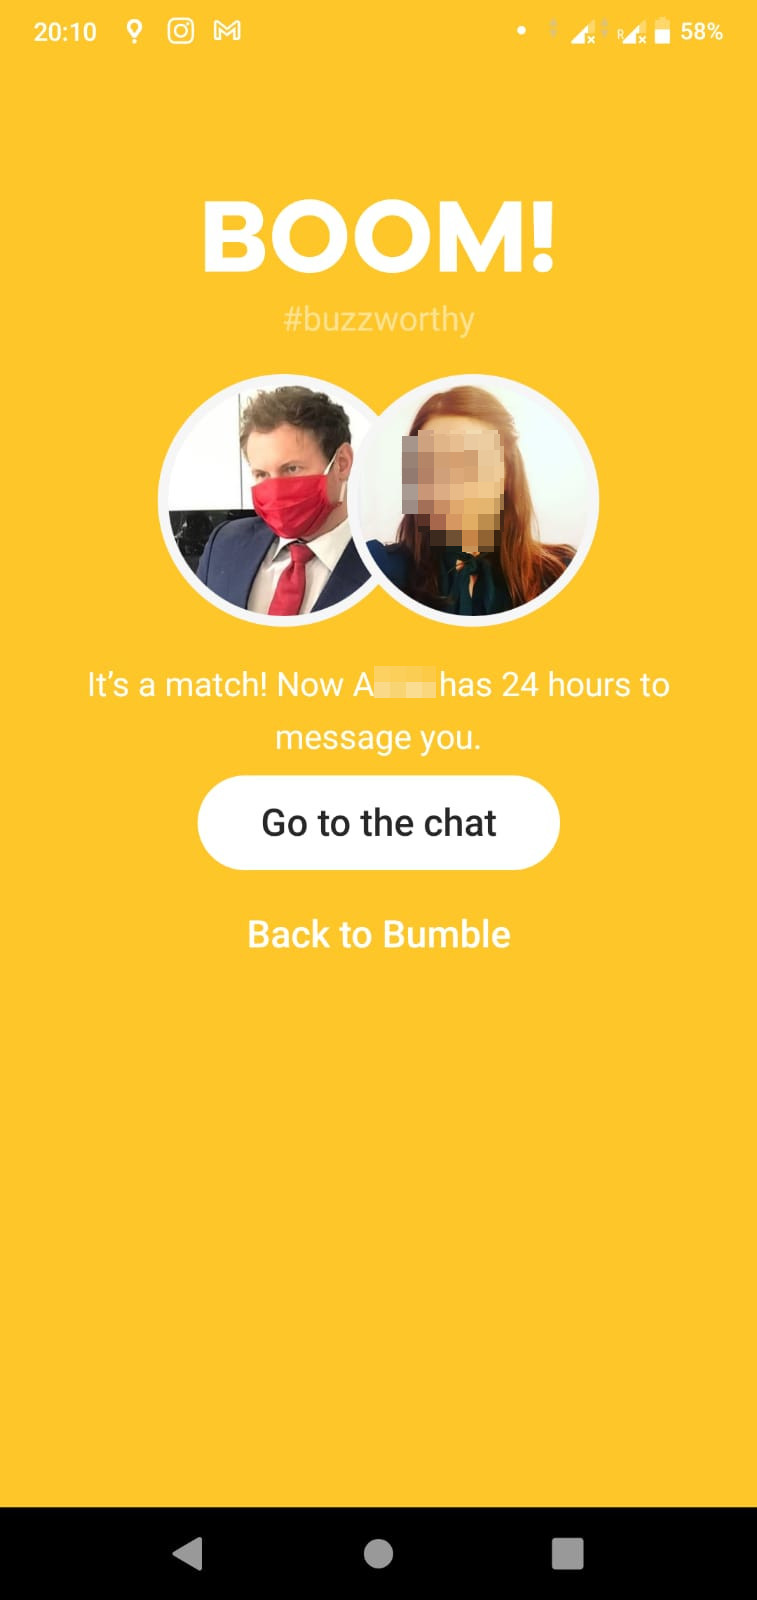 Buzzworthy mean does on bumble what What is